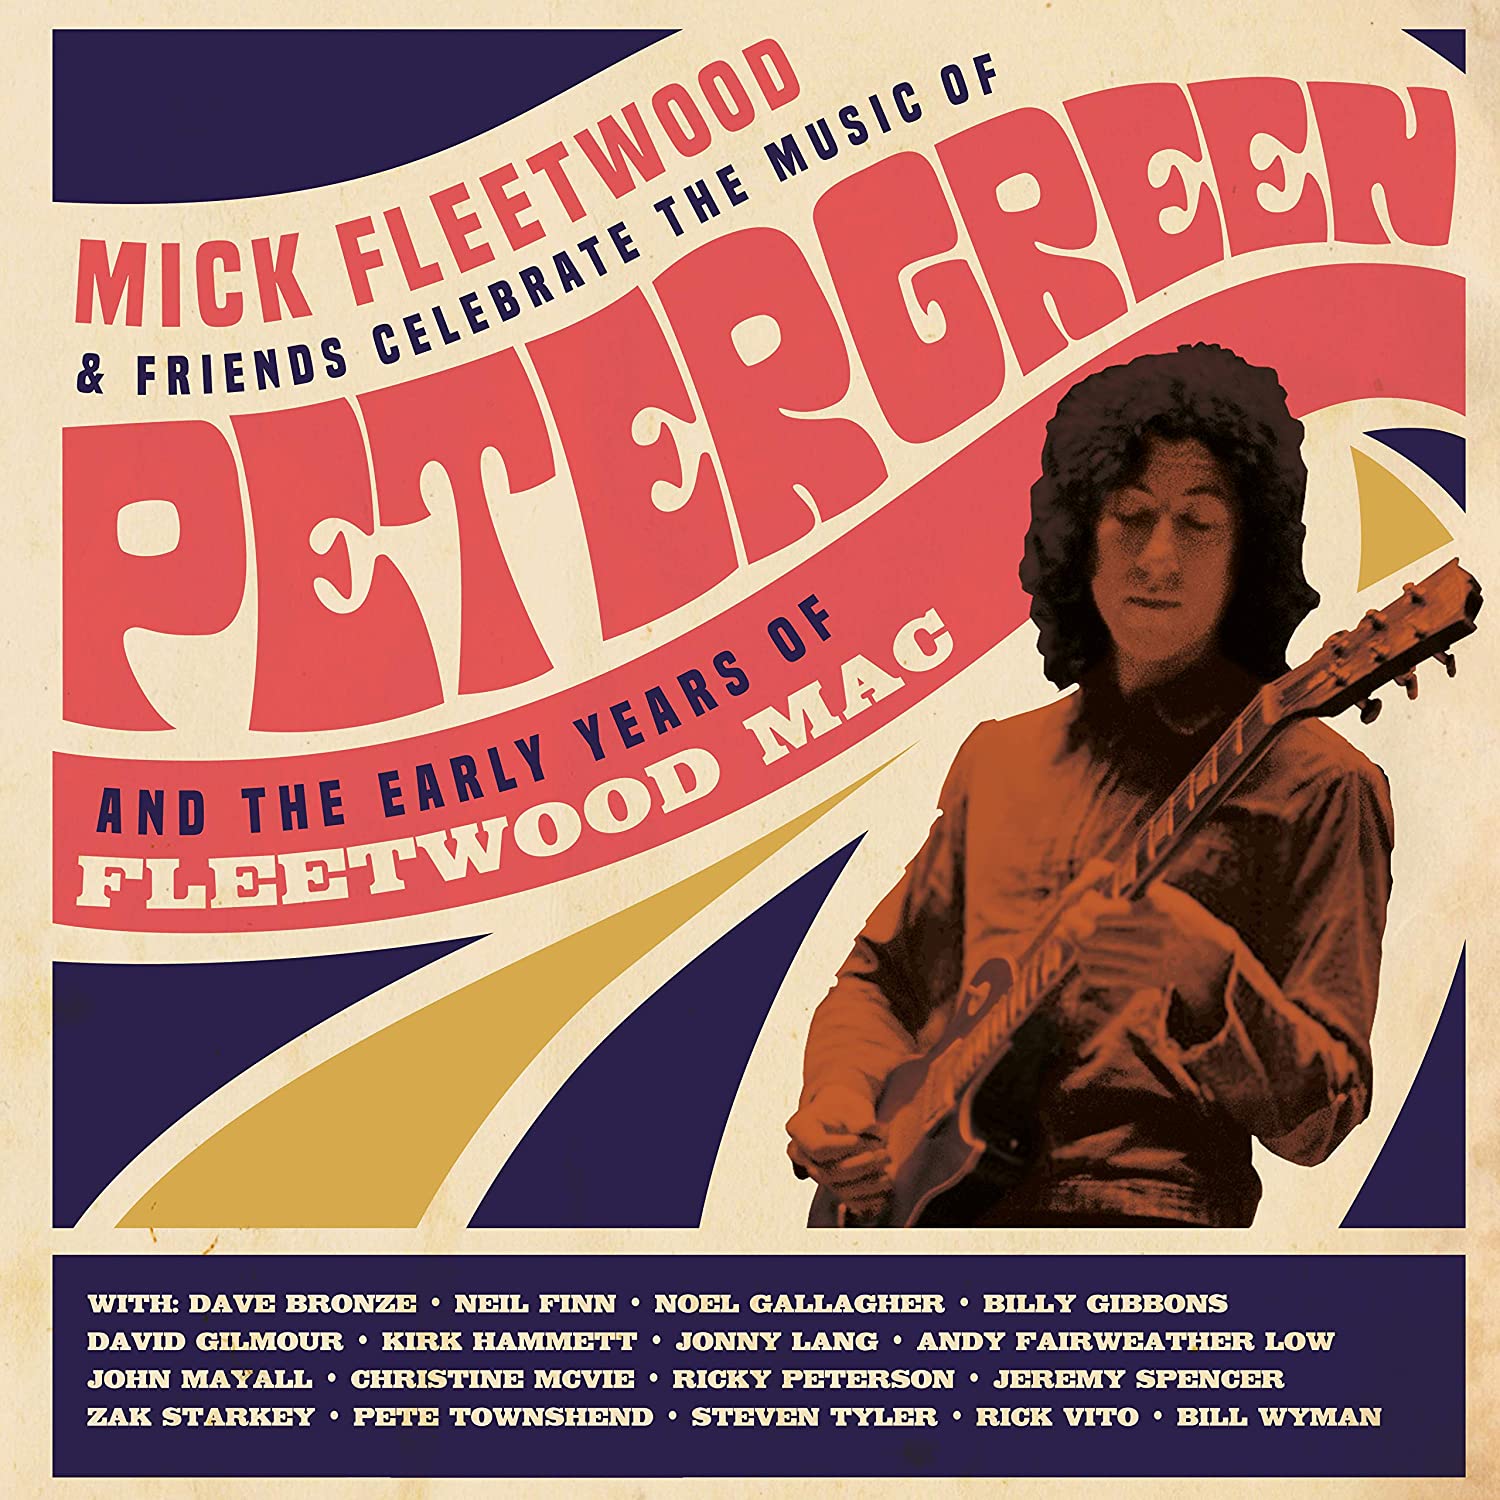 MICK FLEETWOOD & FRIENDS - Celebrate The Music of Peter Green and the Early Years of Fleetwood Mac - 4LP+2CD+BLU RAY - Deluxe Book Pack